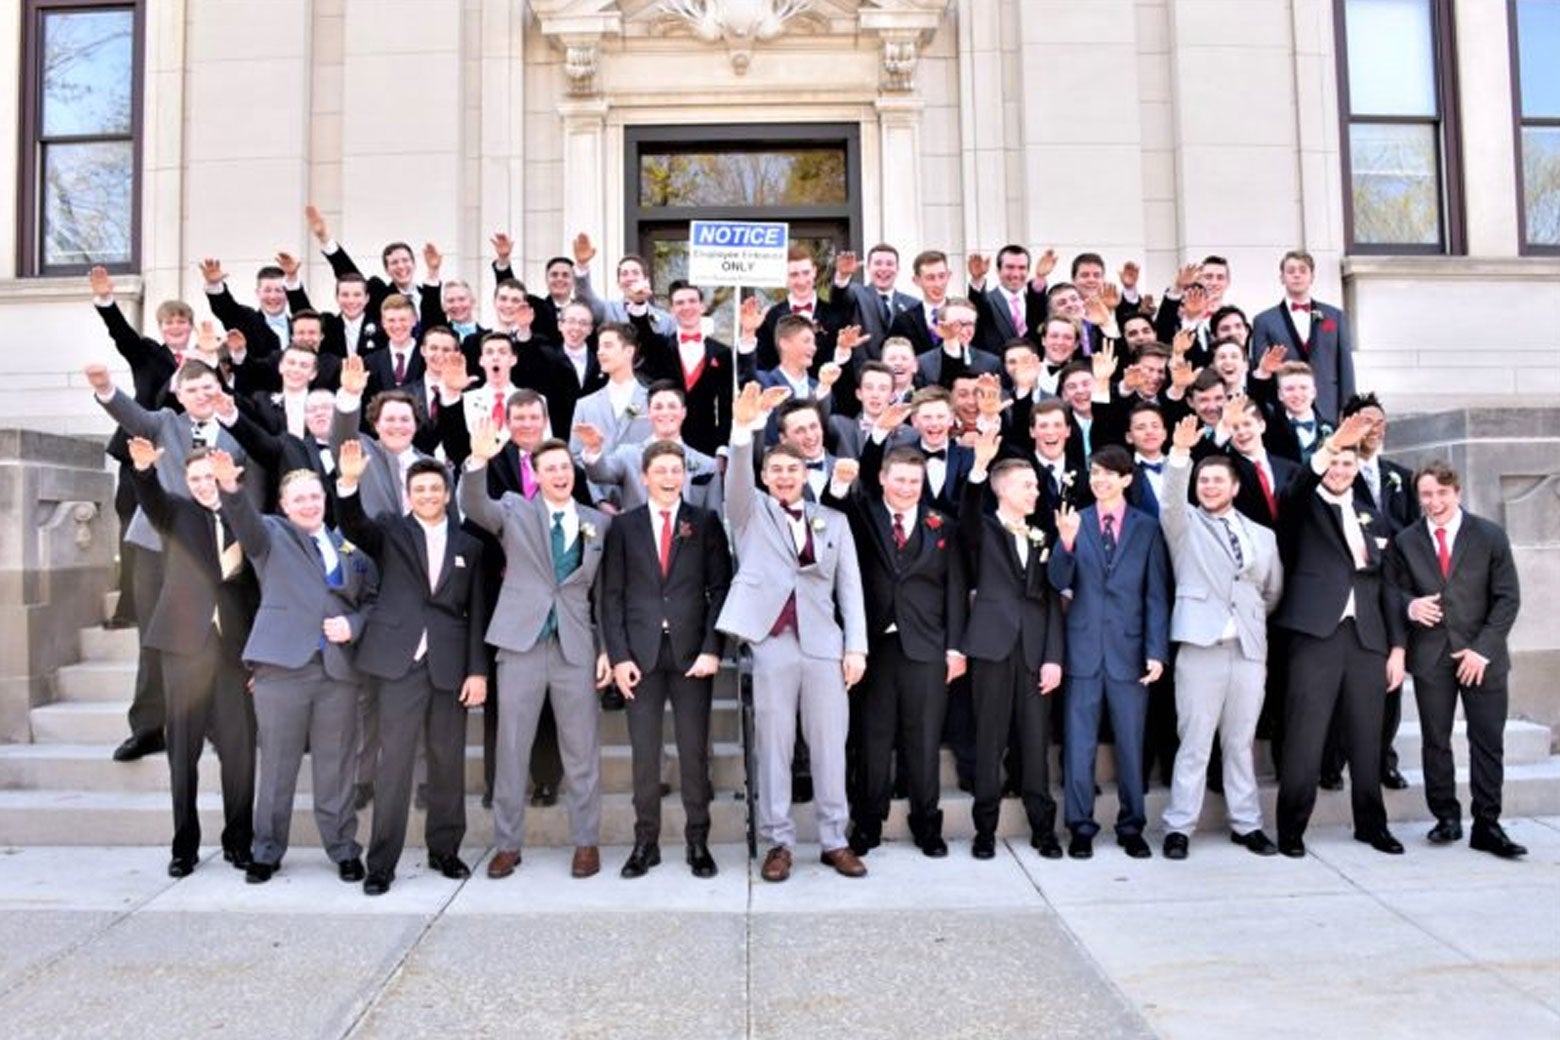 Baraboo High School boys make what appear to be Nazi salutes in a group photo.